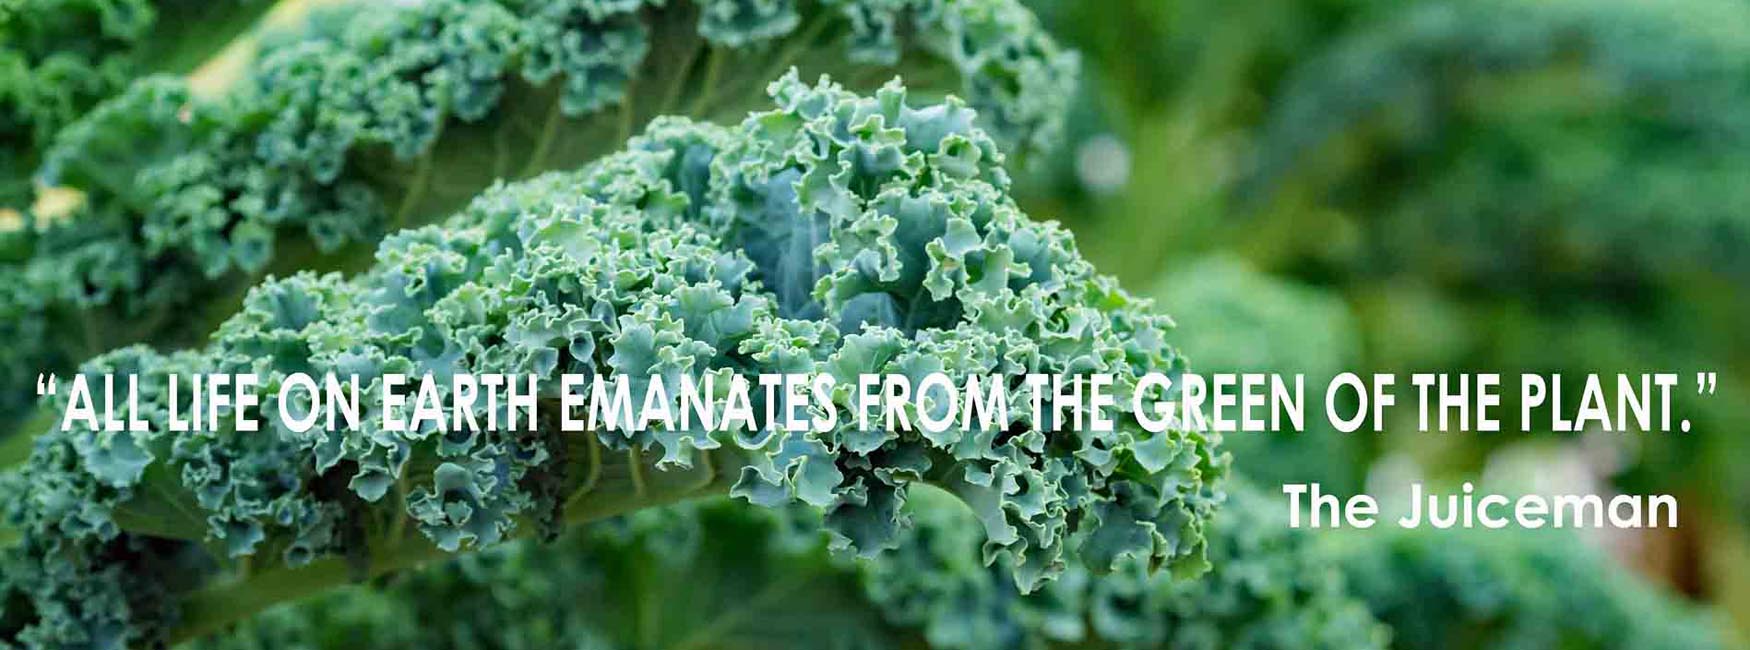 Kale adds healthy variety to your diet.